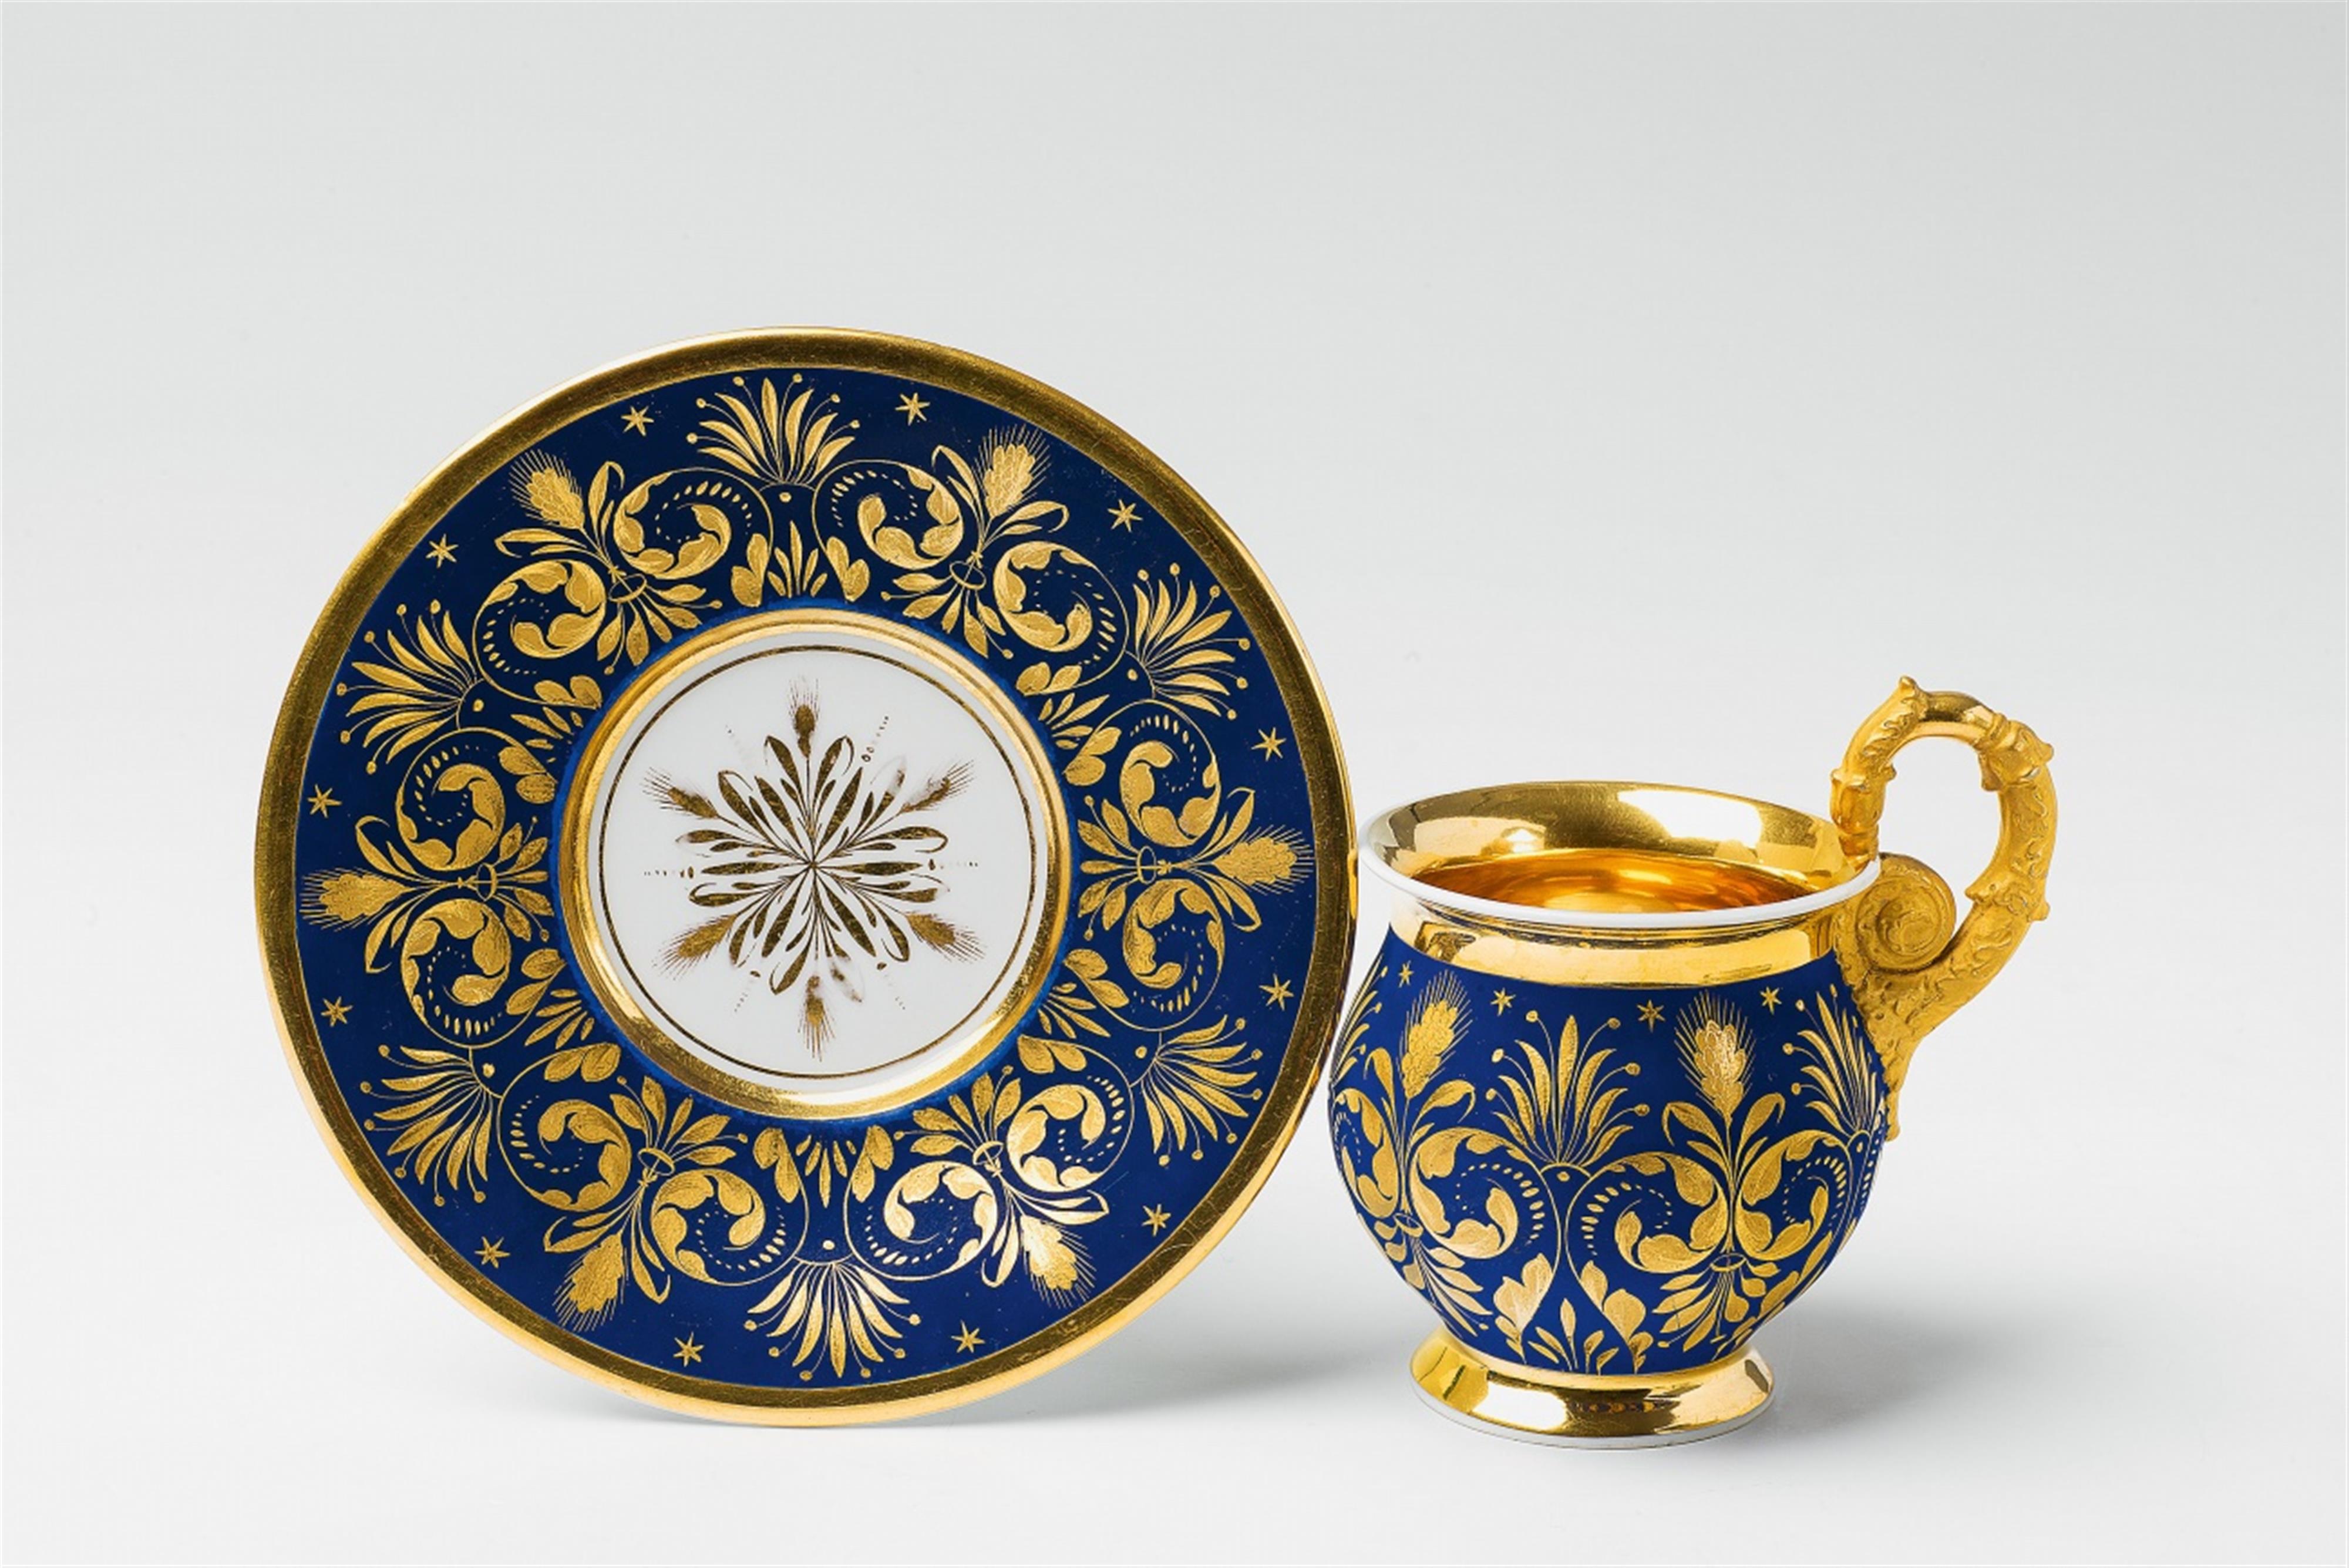 A rare Berlin KPM porcelain cup and saucer with royal blue ground - image-1